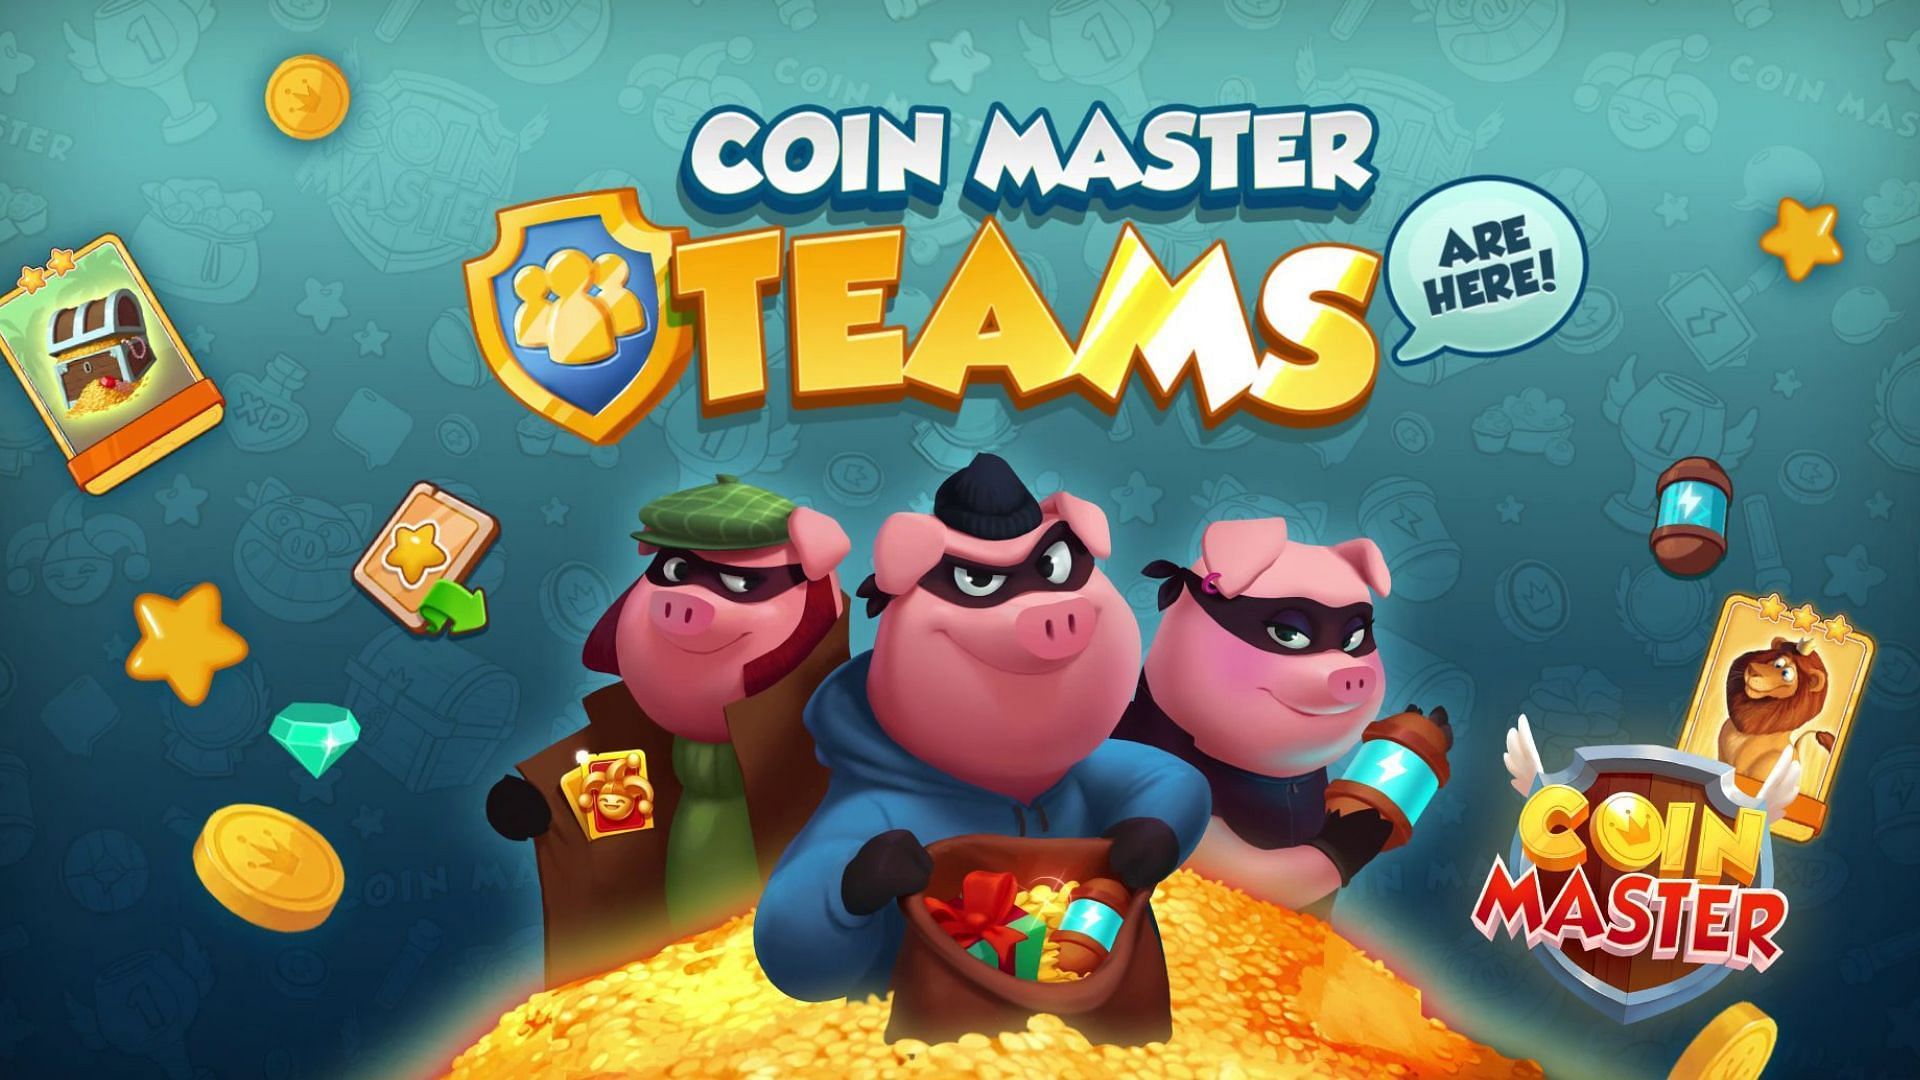 Coin Master Trading Group